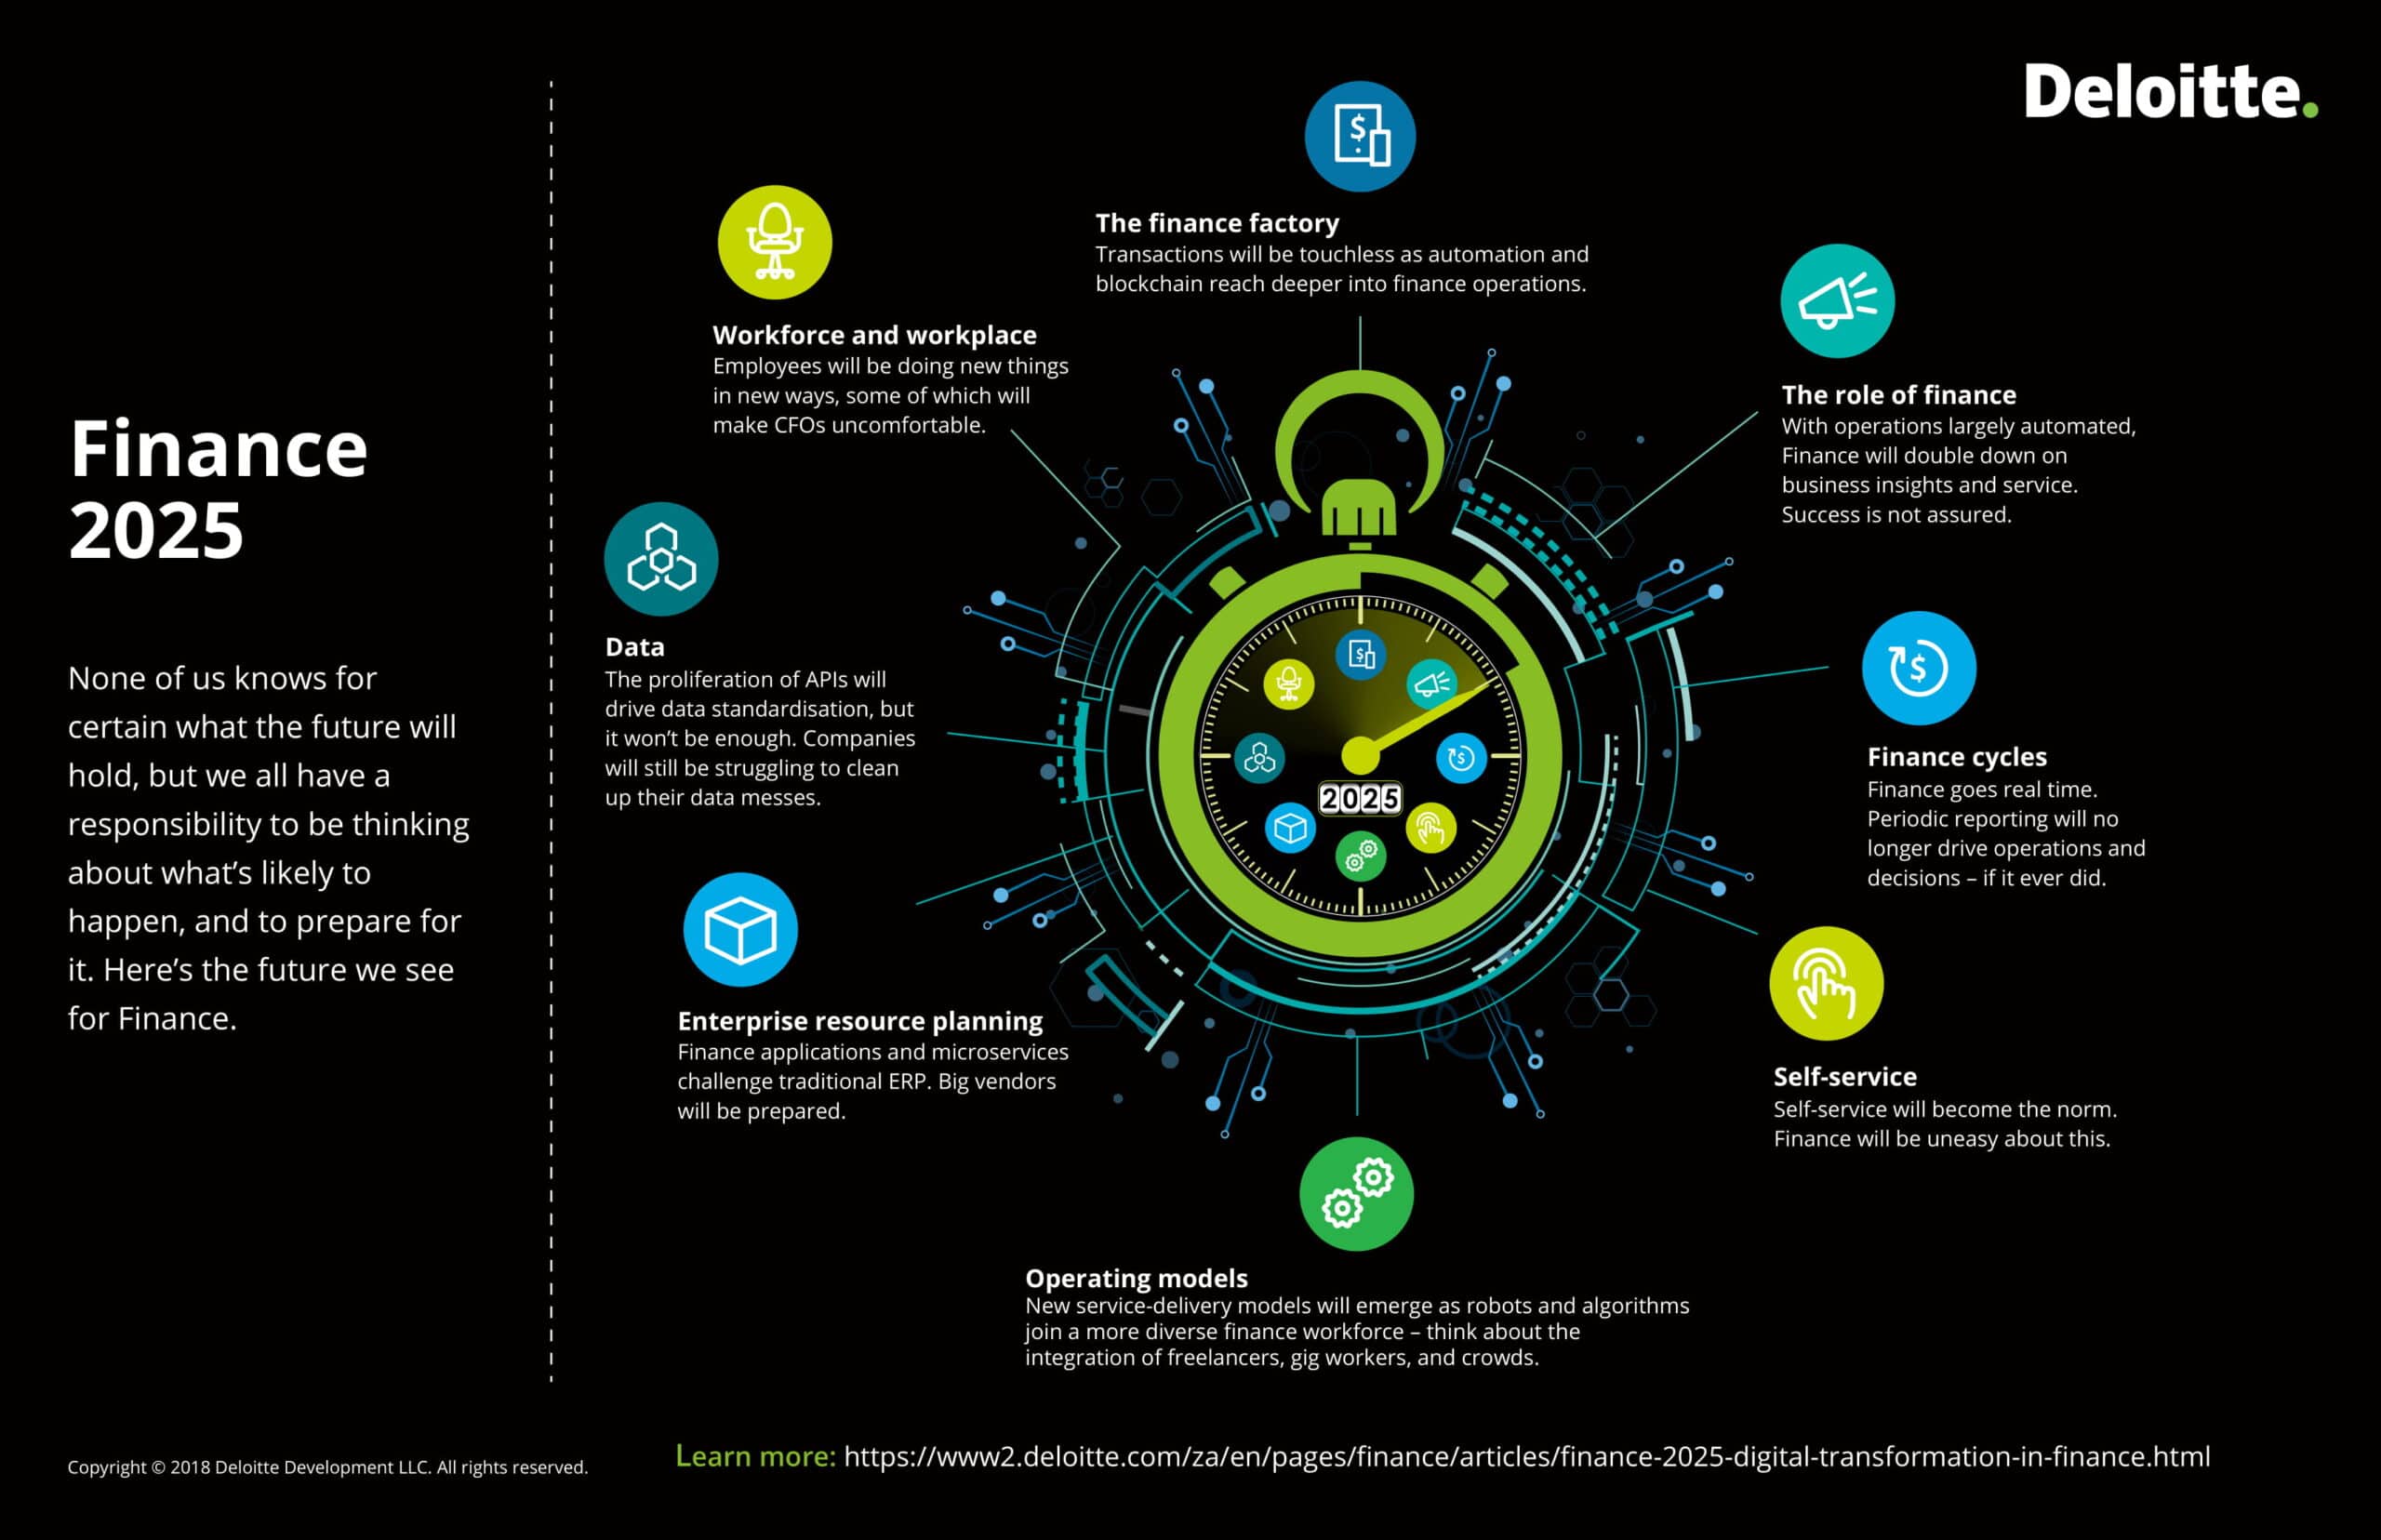 Finance 2025: Deloitte's perspective on what the future - Digital Street